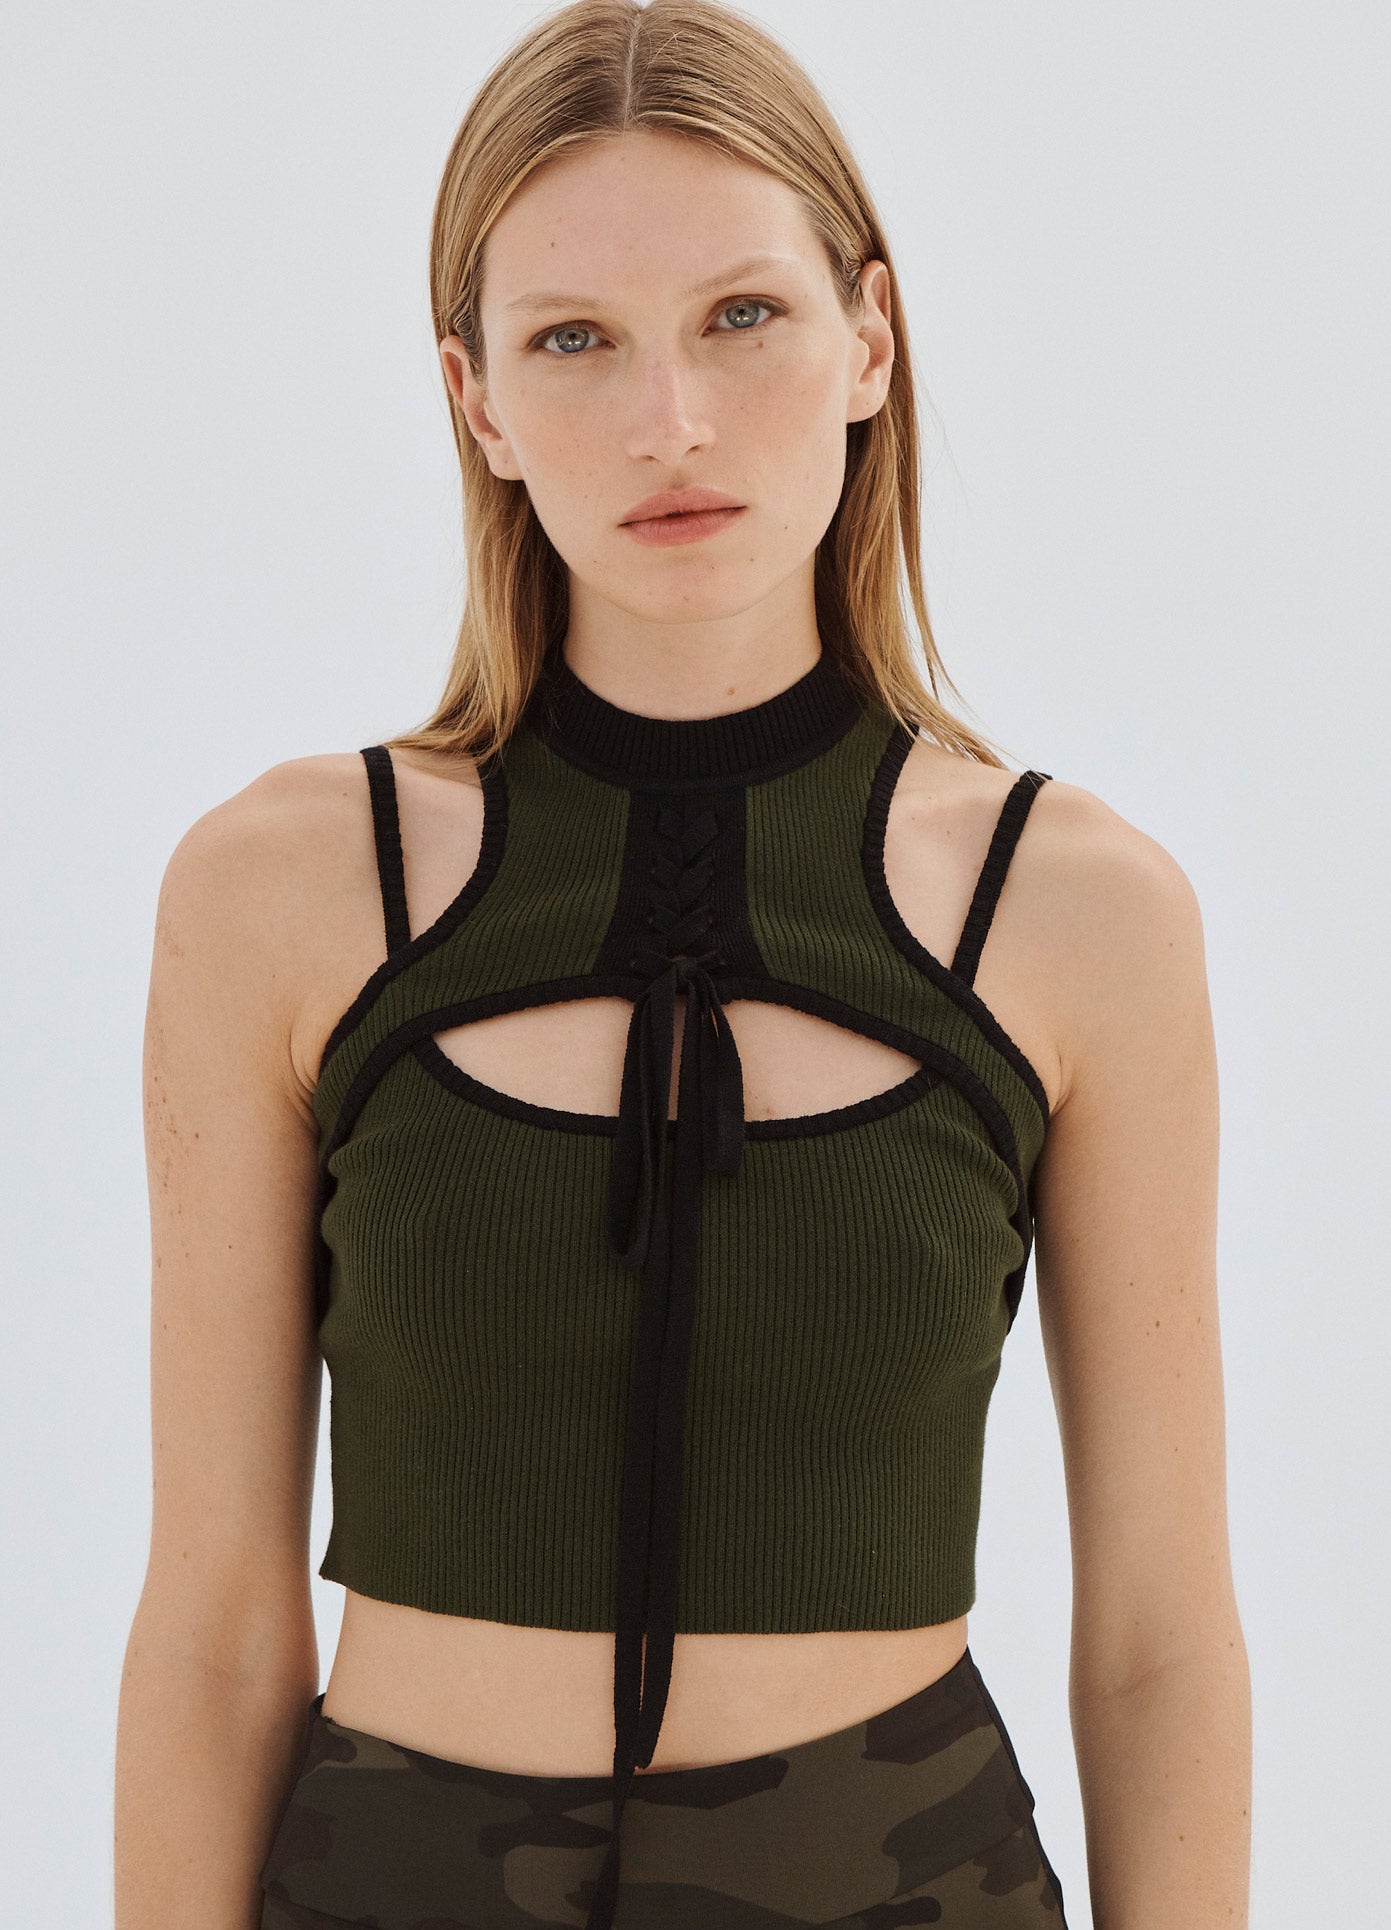 MONSE Halter Neck Knit Top in Olive on Model Front Detail View